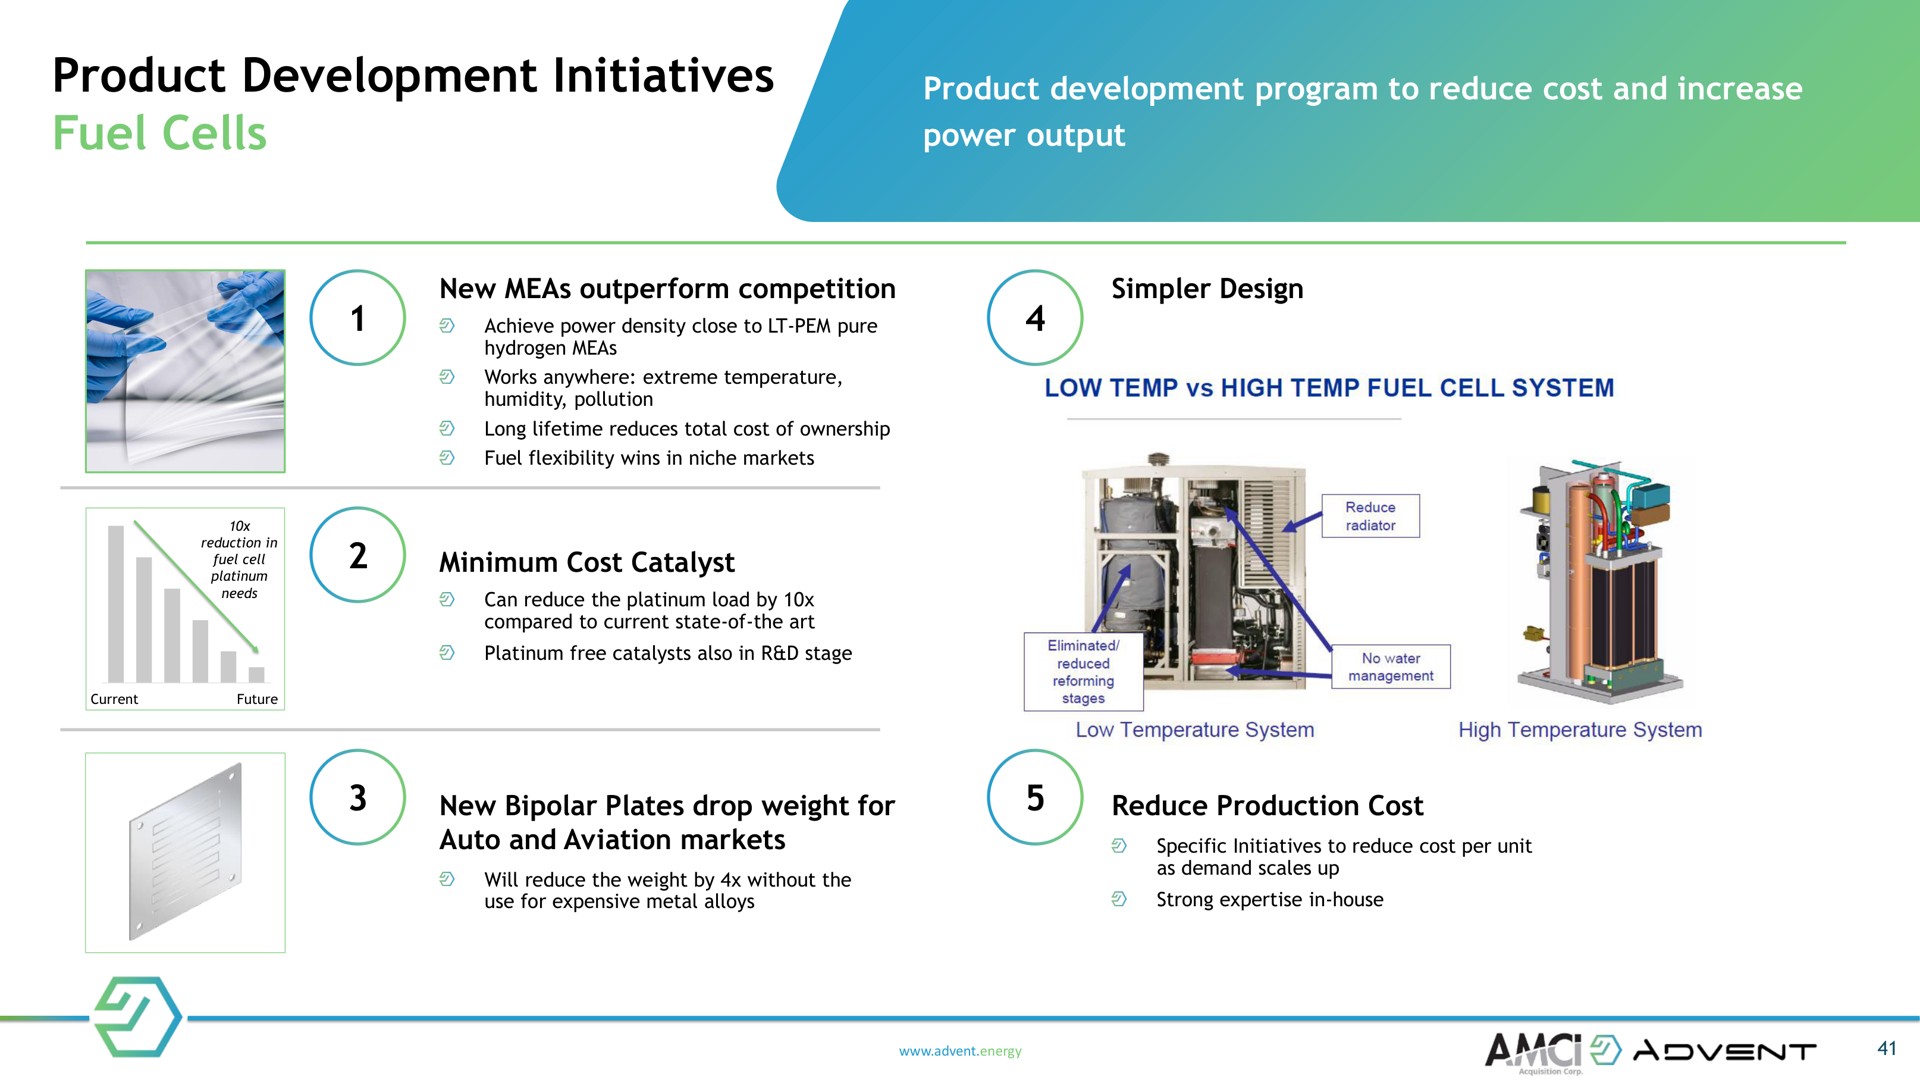 product development initiatives fuel cells program to reduce cost and increase mele new outperform competition simpler design achieve power density close to pure hydrogen works anywhere extreme temperature long lifetime reduces total cost of ownership flexibility wins in niche markets minimum cost catalyst can reduce the platinum load by compared to current state of the art platinum free catalysts also in stage in cell platinum needs current future low temp high temp cell system eliminated reduced reforming stages reduce radiator no water management low temperature system high temperature system new bipolar plates drop weight for auto and aviation markets will reduce the weight by without the use for expensive metal alloys reduce production cost specific to reduce cost per unit as scales up strong in house energy am | Advent